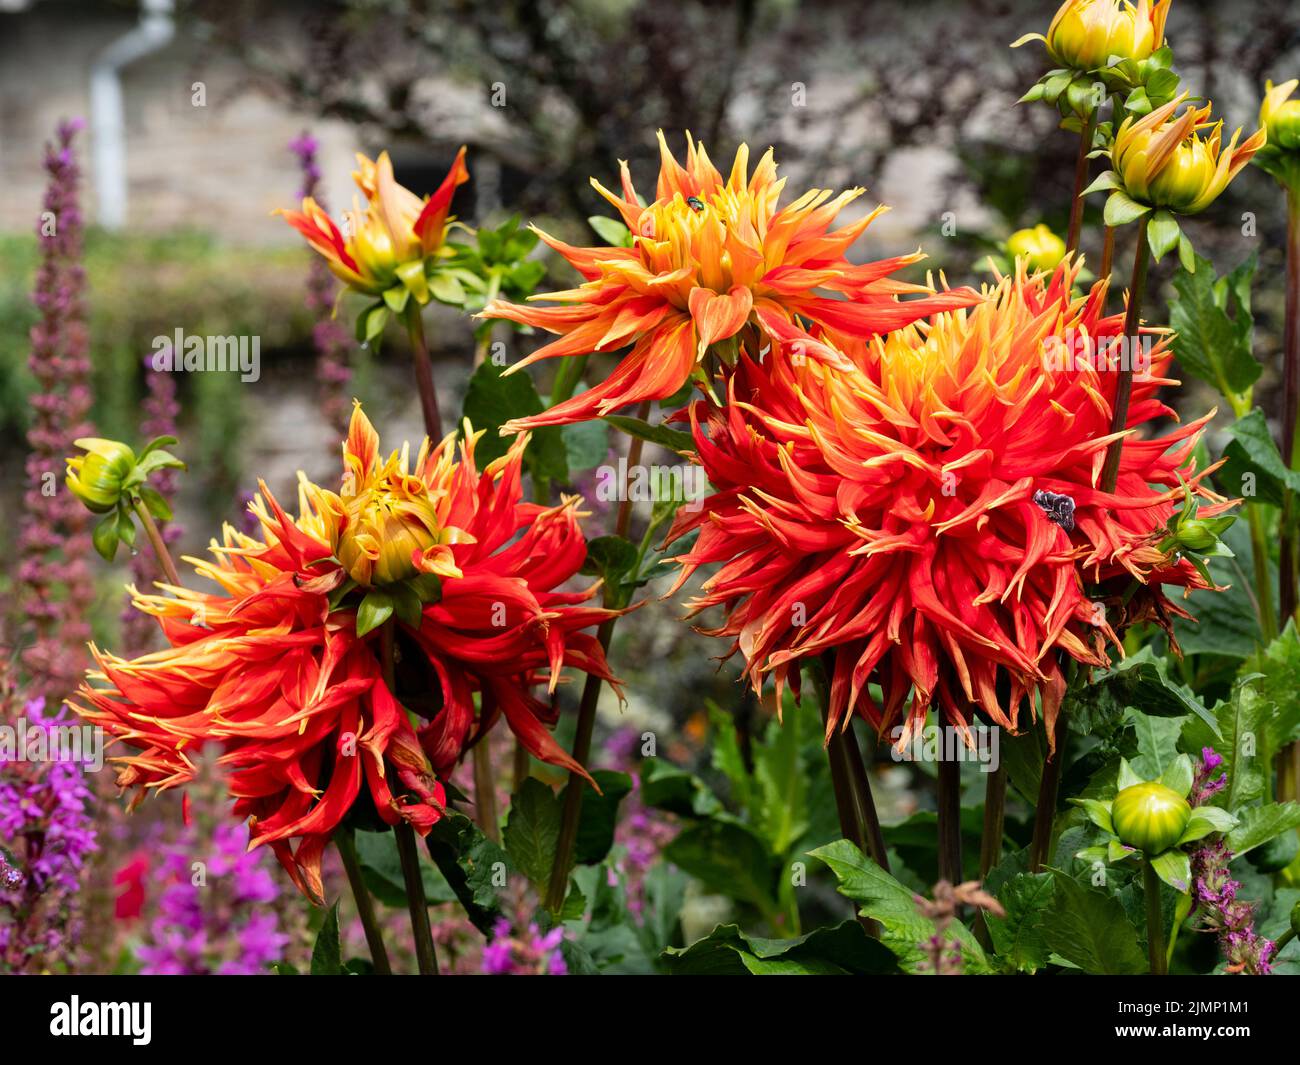 Large, colourful red and yellow flower of the cactus dahlia, Dahlia 'Show and Tell' Stock Photo